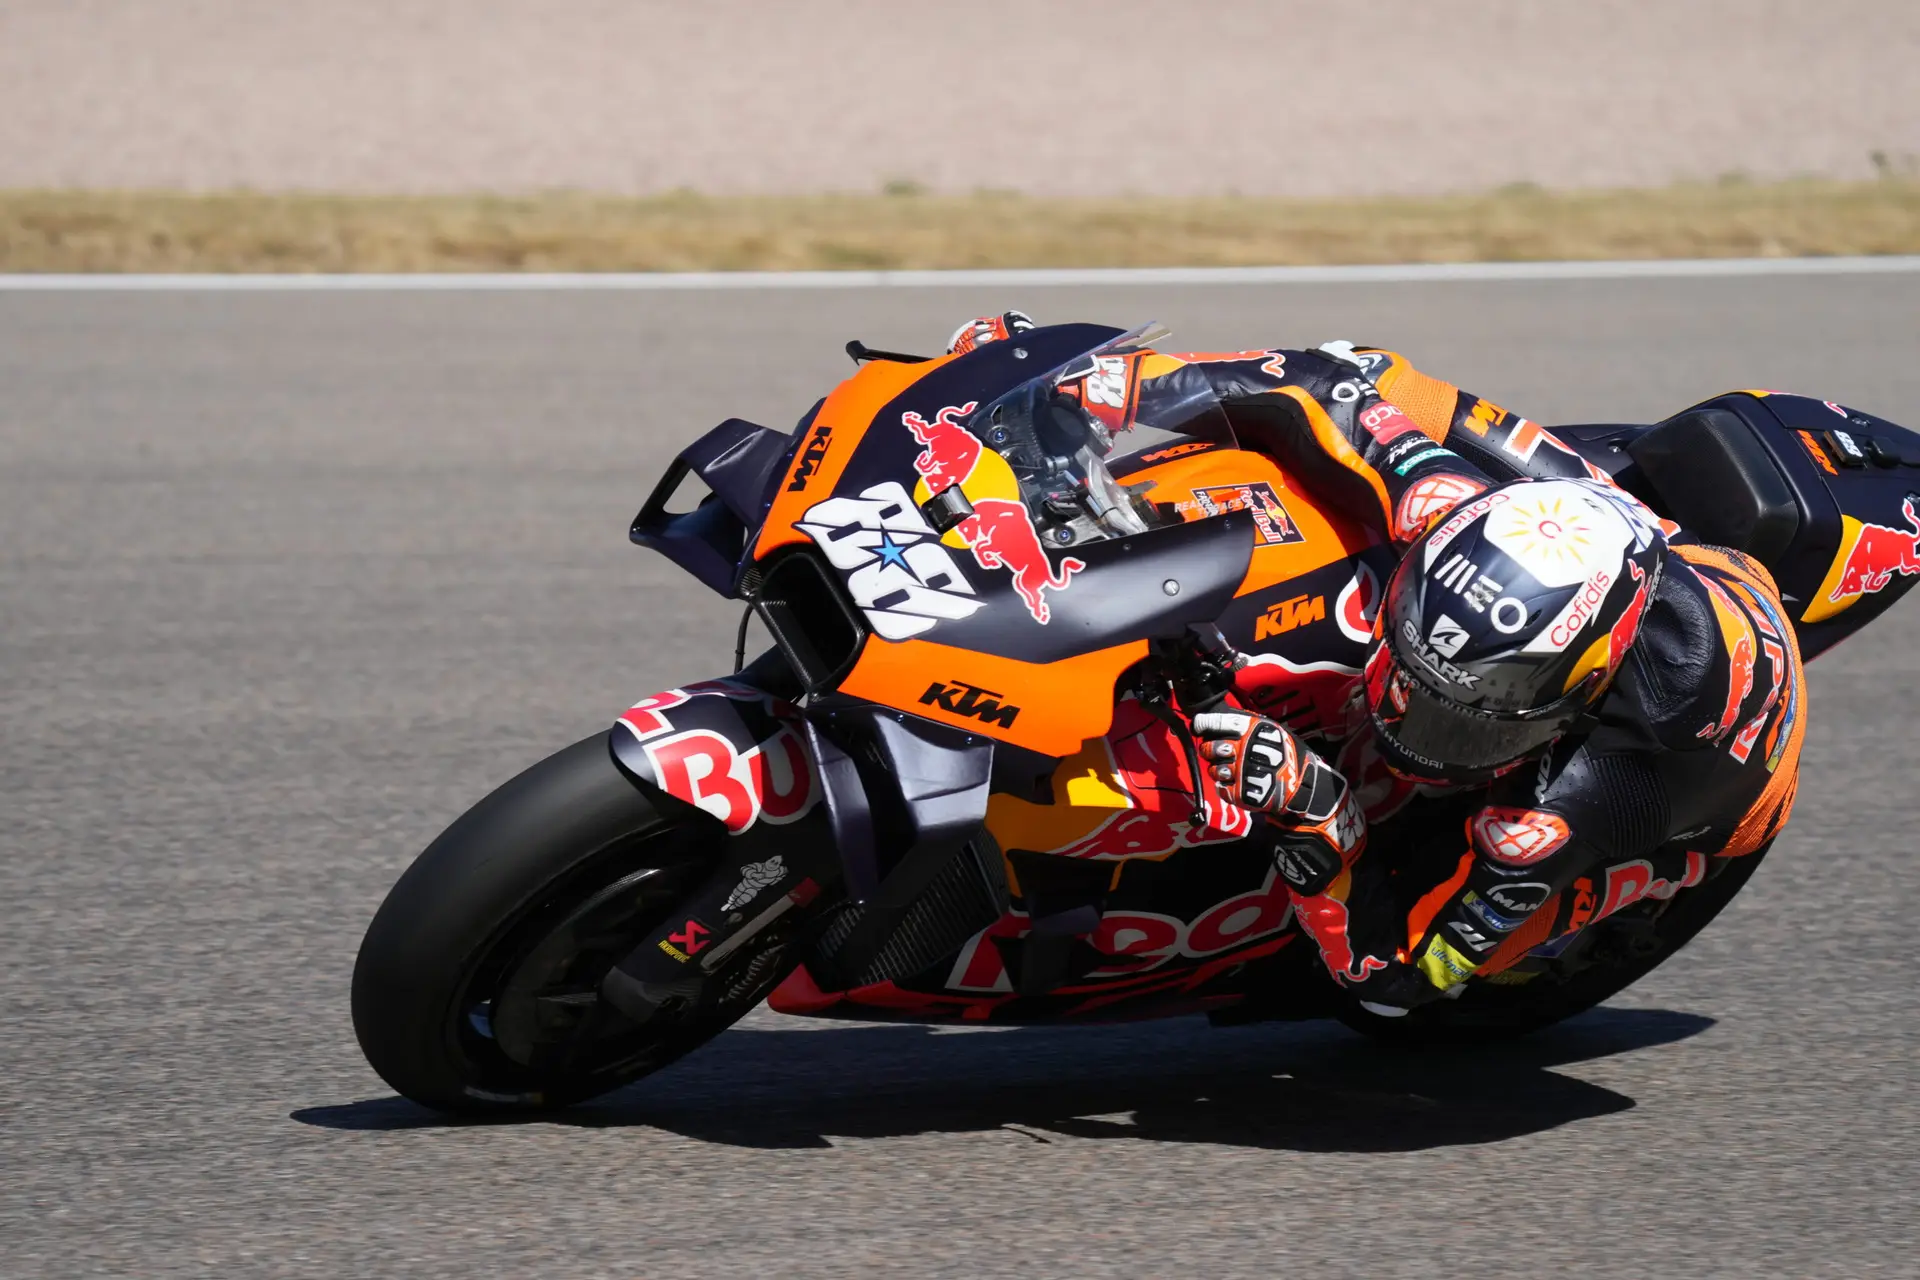 HOHENSTEIN-ERNSTTHAL, GERMANY – JUNE 17: Miguel Oliveira (PRT) Red Bull KTM Factory Racing rides during the free practice of the MotoGP Liqui Moly Motorrad Grand Prix Deutschland at Sachsenring Circuit on June 17, 2022 in Hohenstein-Ernstthal, Germany. (Photo by Stiefel Udo/ATPImages/Getty images)